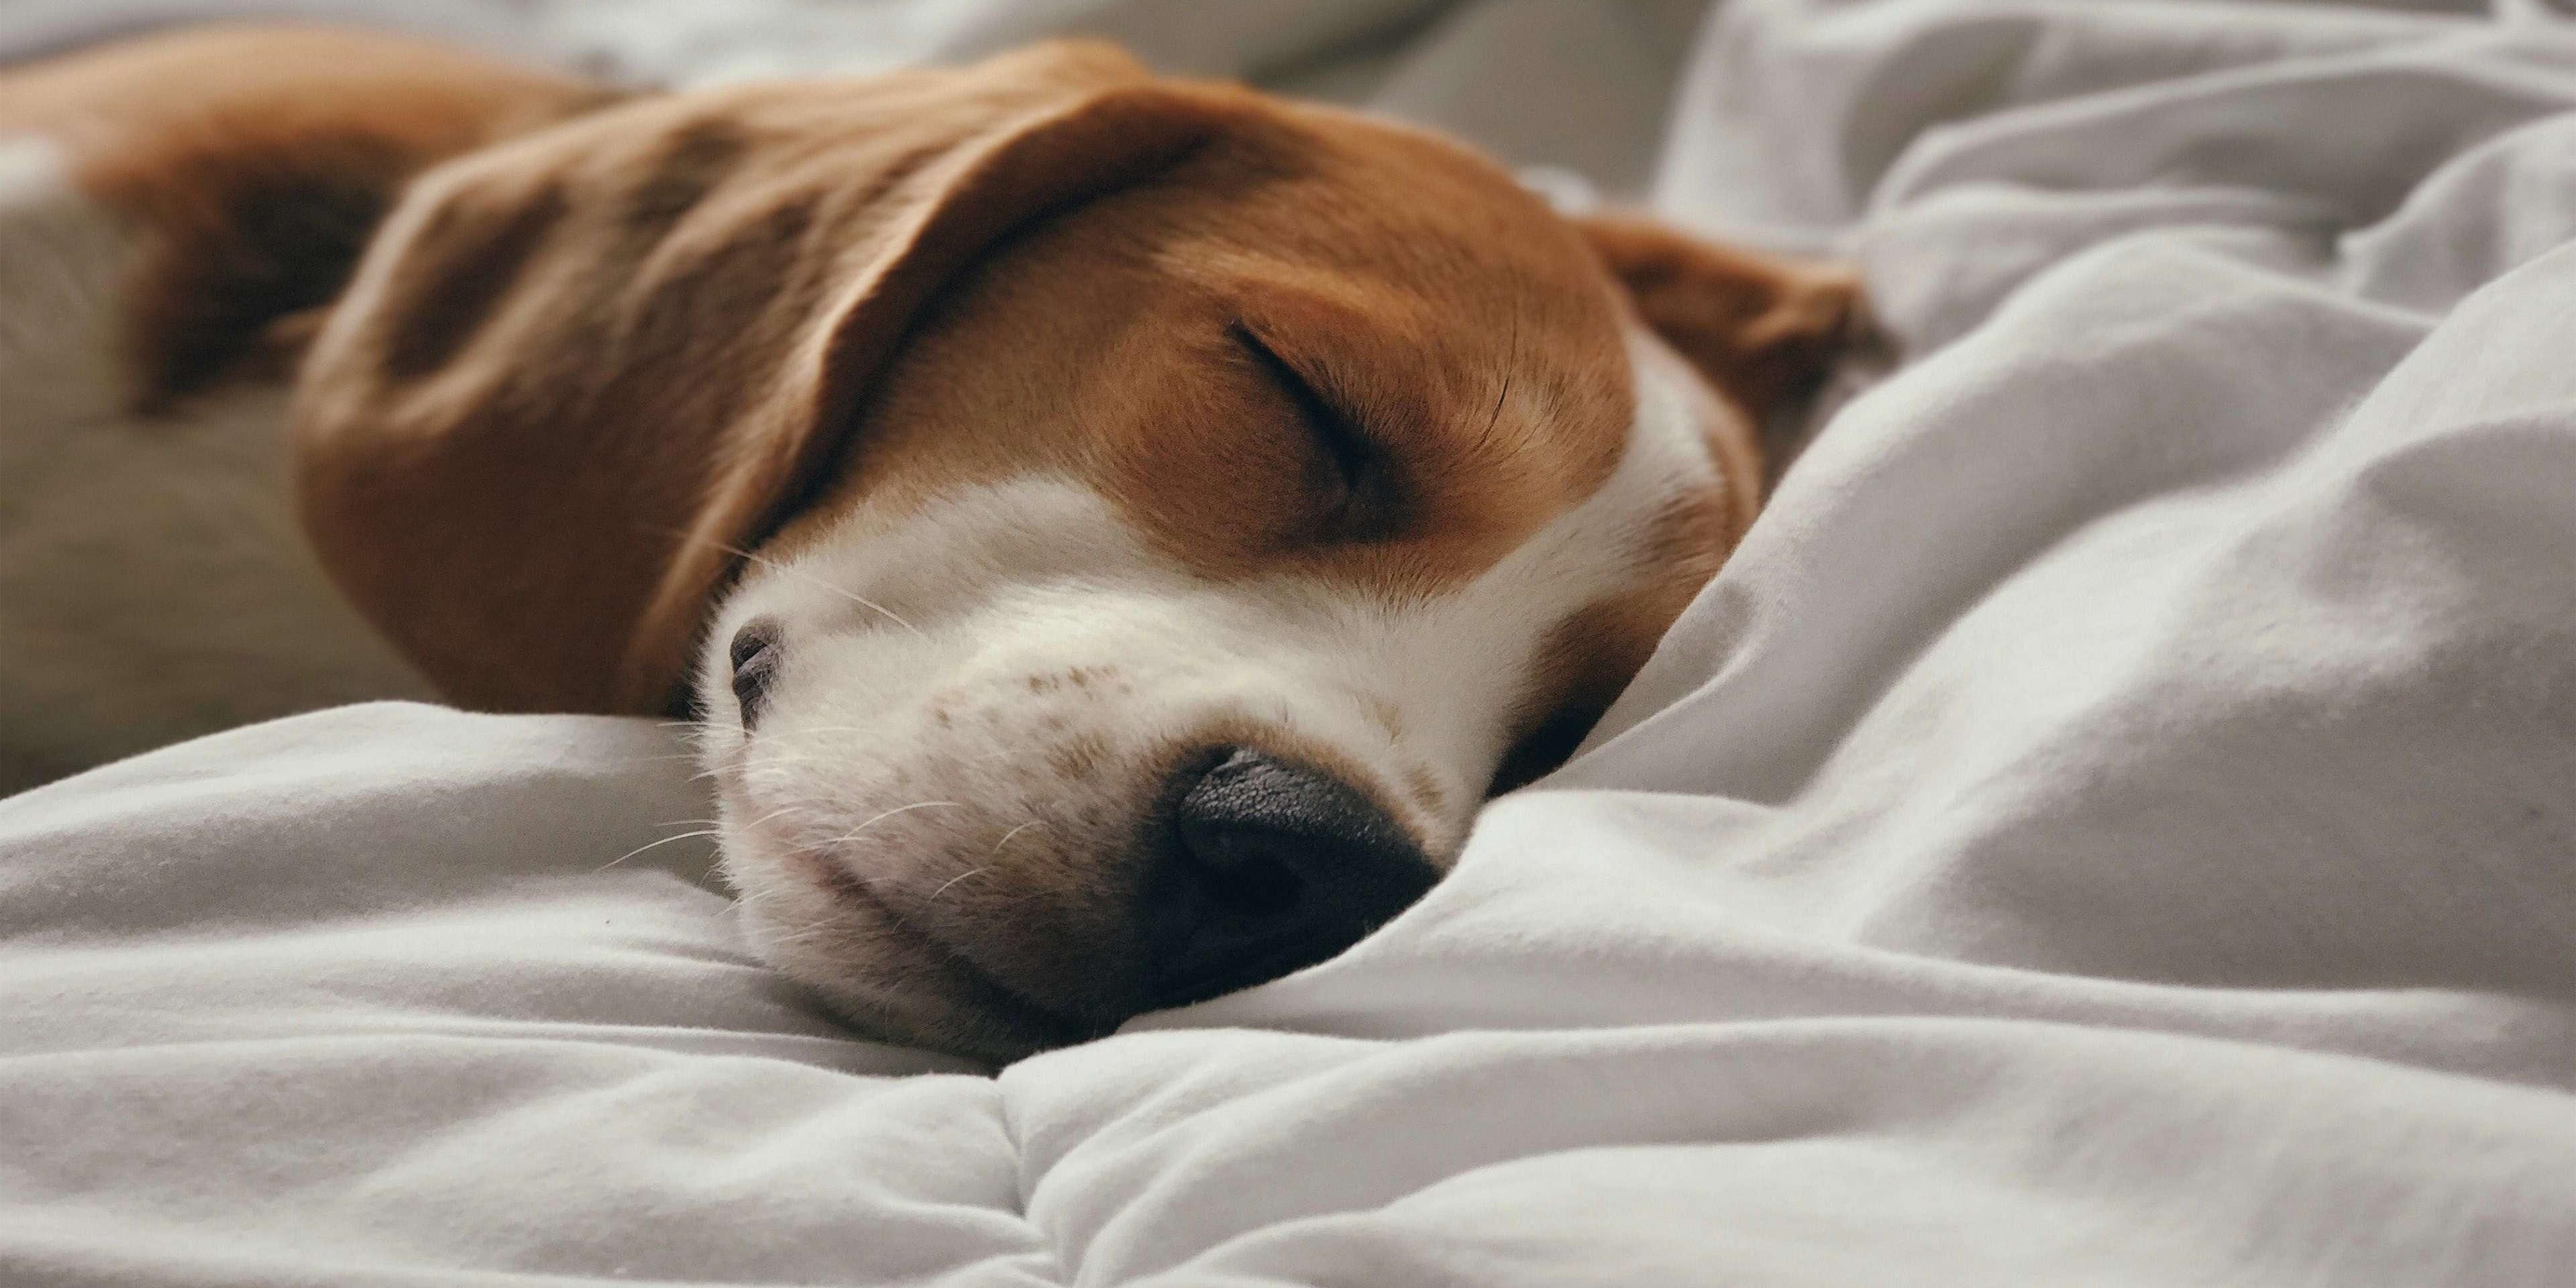 Pets are welcome at our hotel, by prior arrangement. An additional charge of GBP 25 per pet per stay applies. Includes dog goody bag. Contact the hotel to check availability.